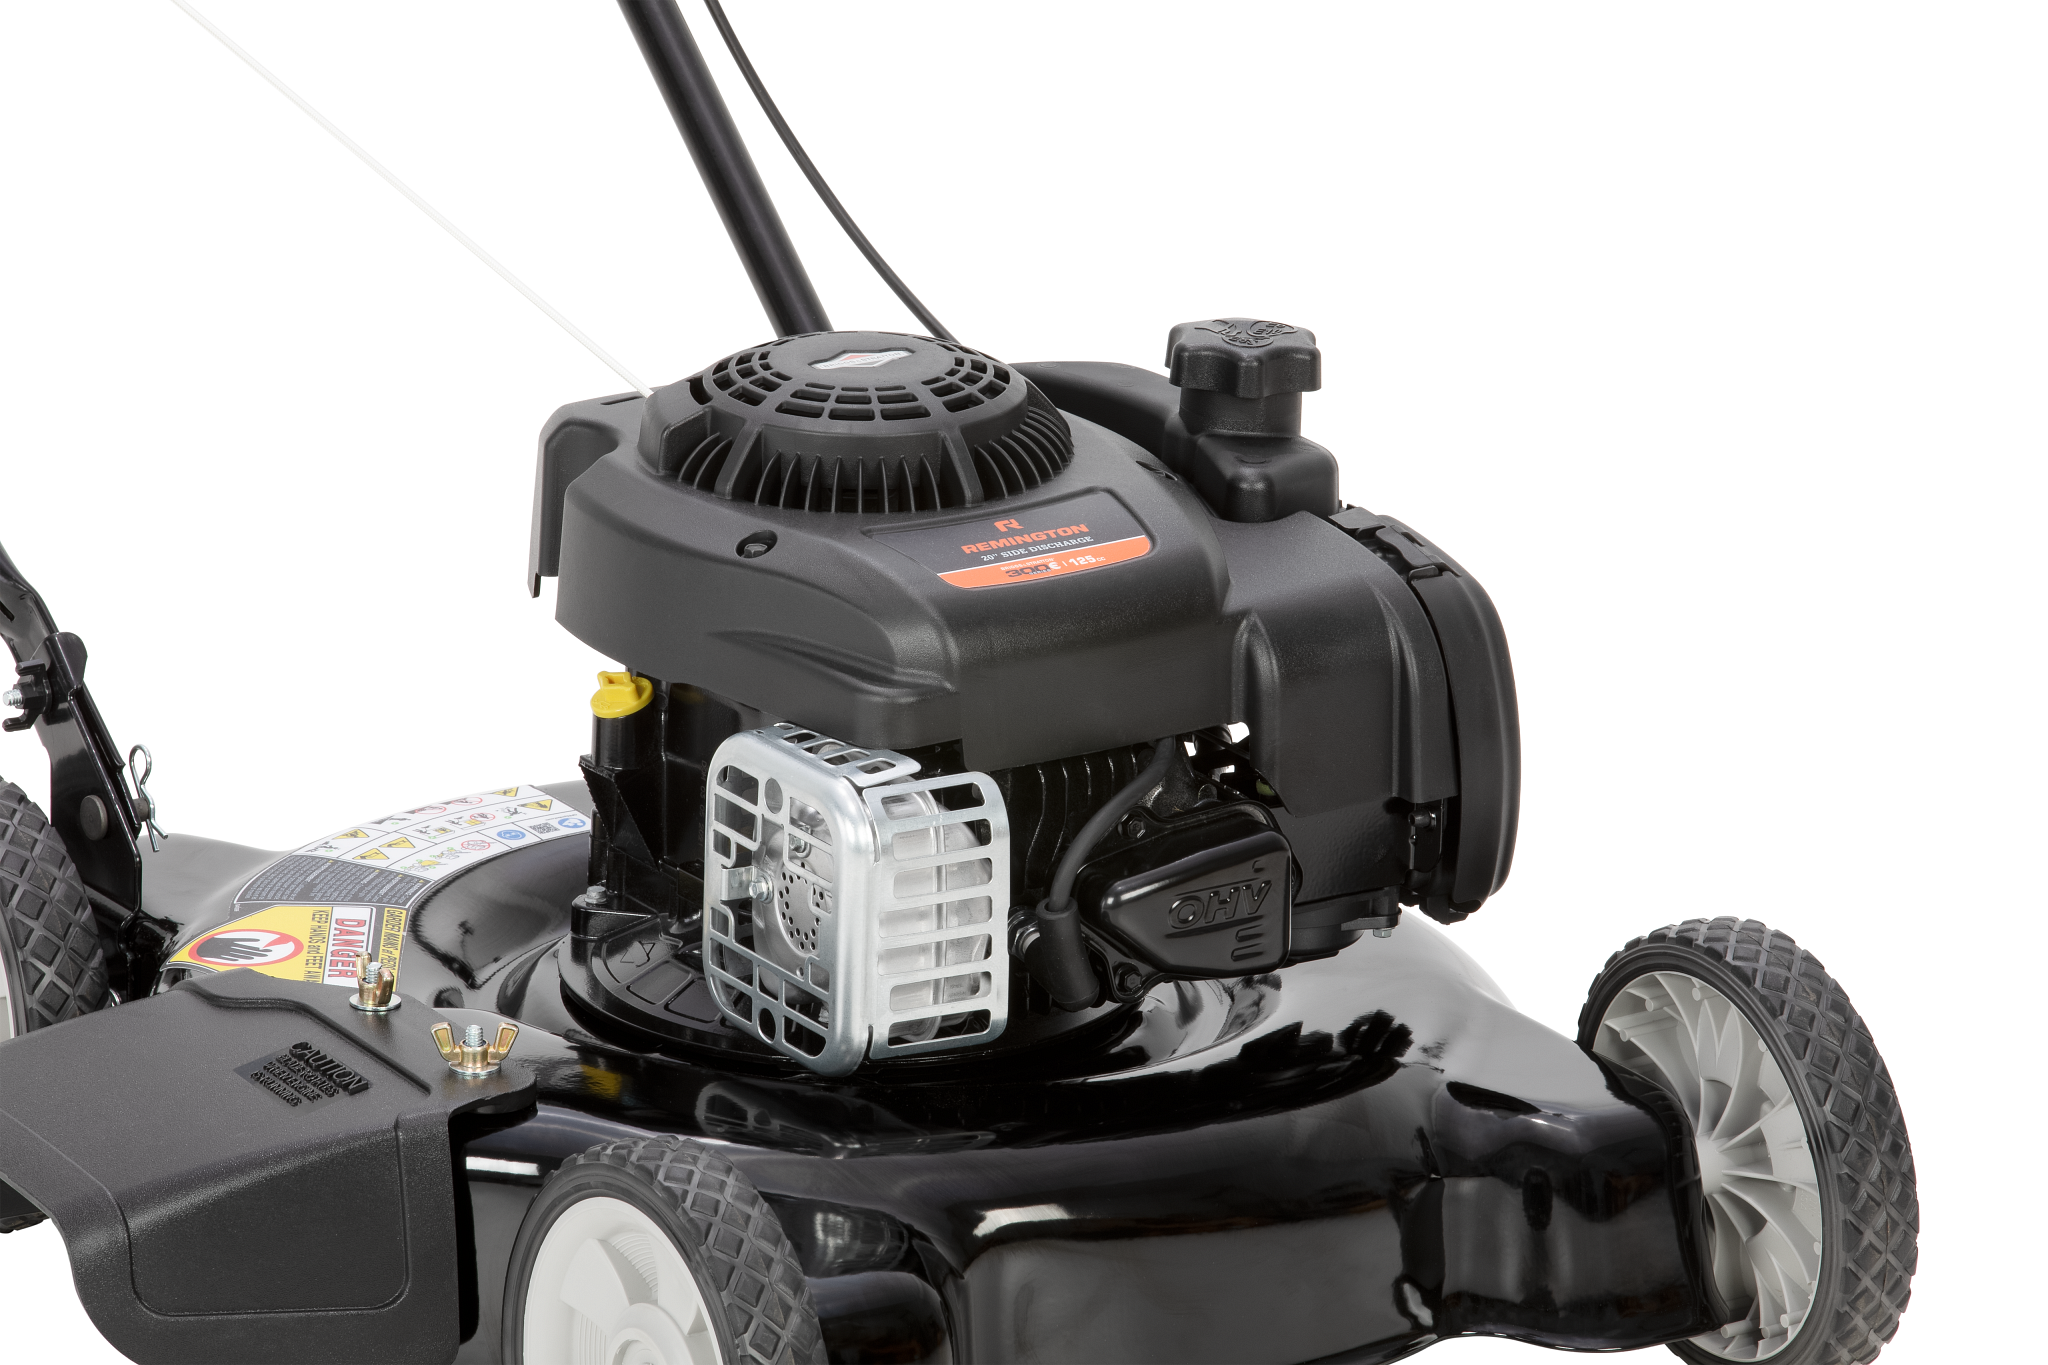 Remington 20" Push Lawn Mower with 125cc Briggs & Stratton Gas Powered Engine - image 5 of 8